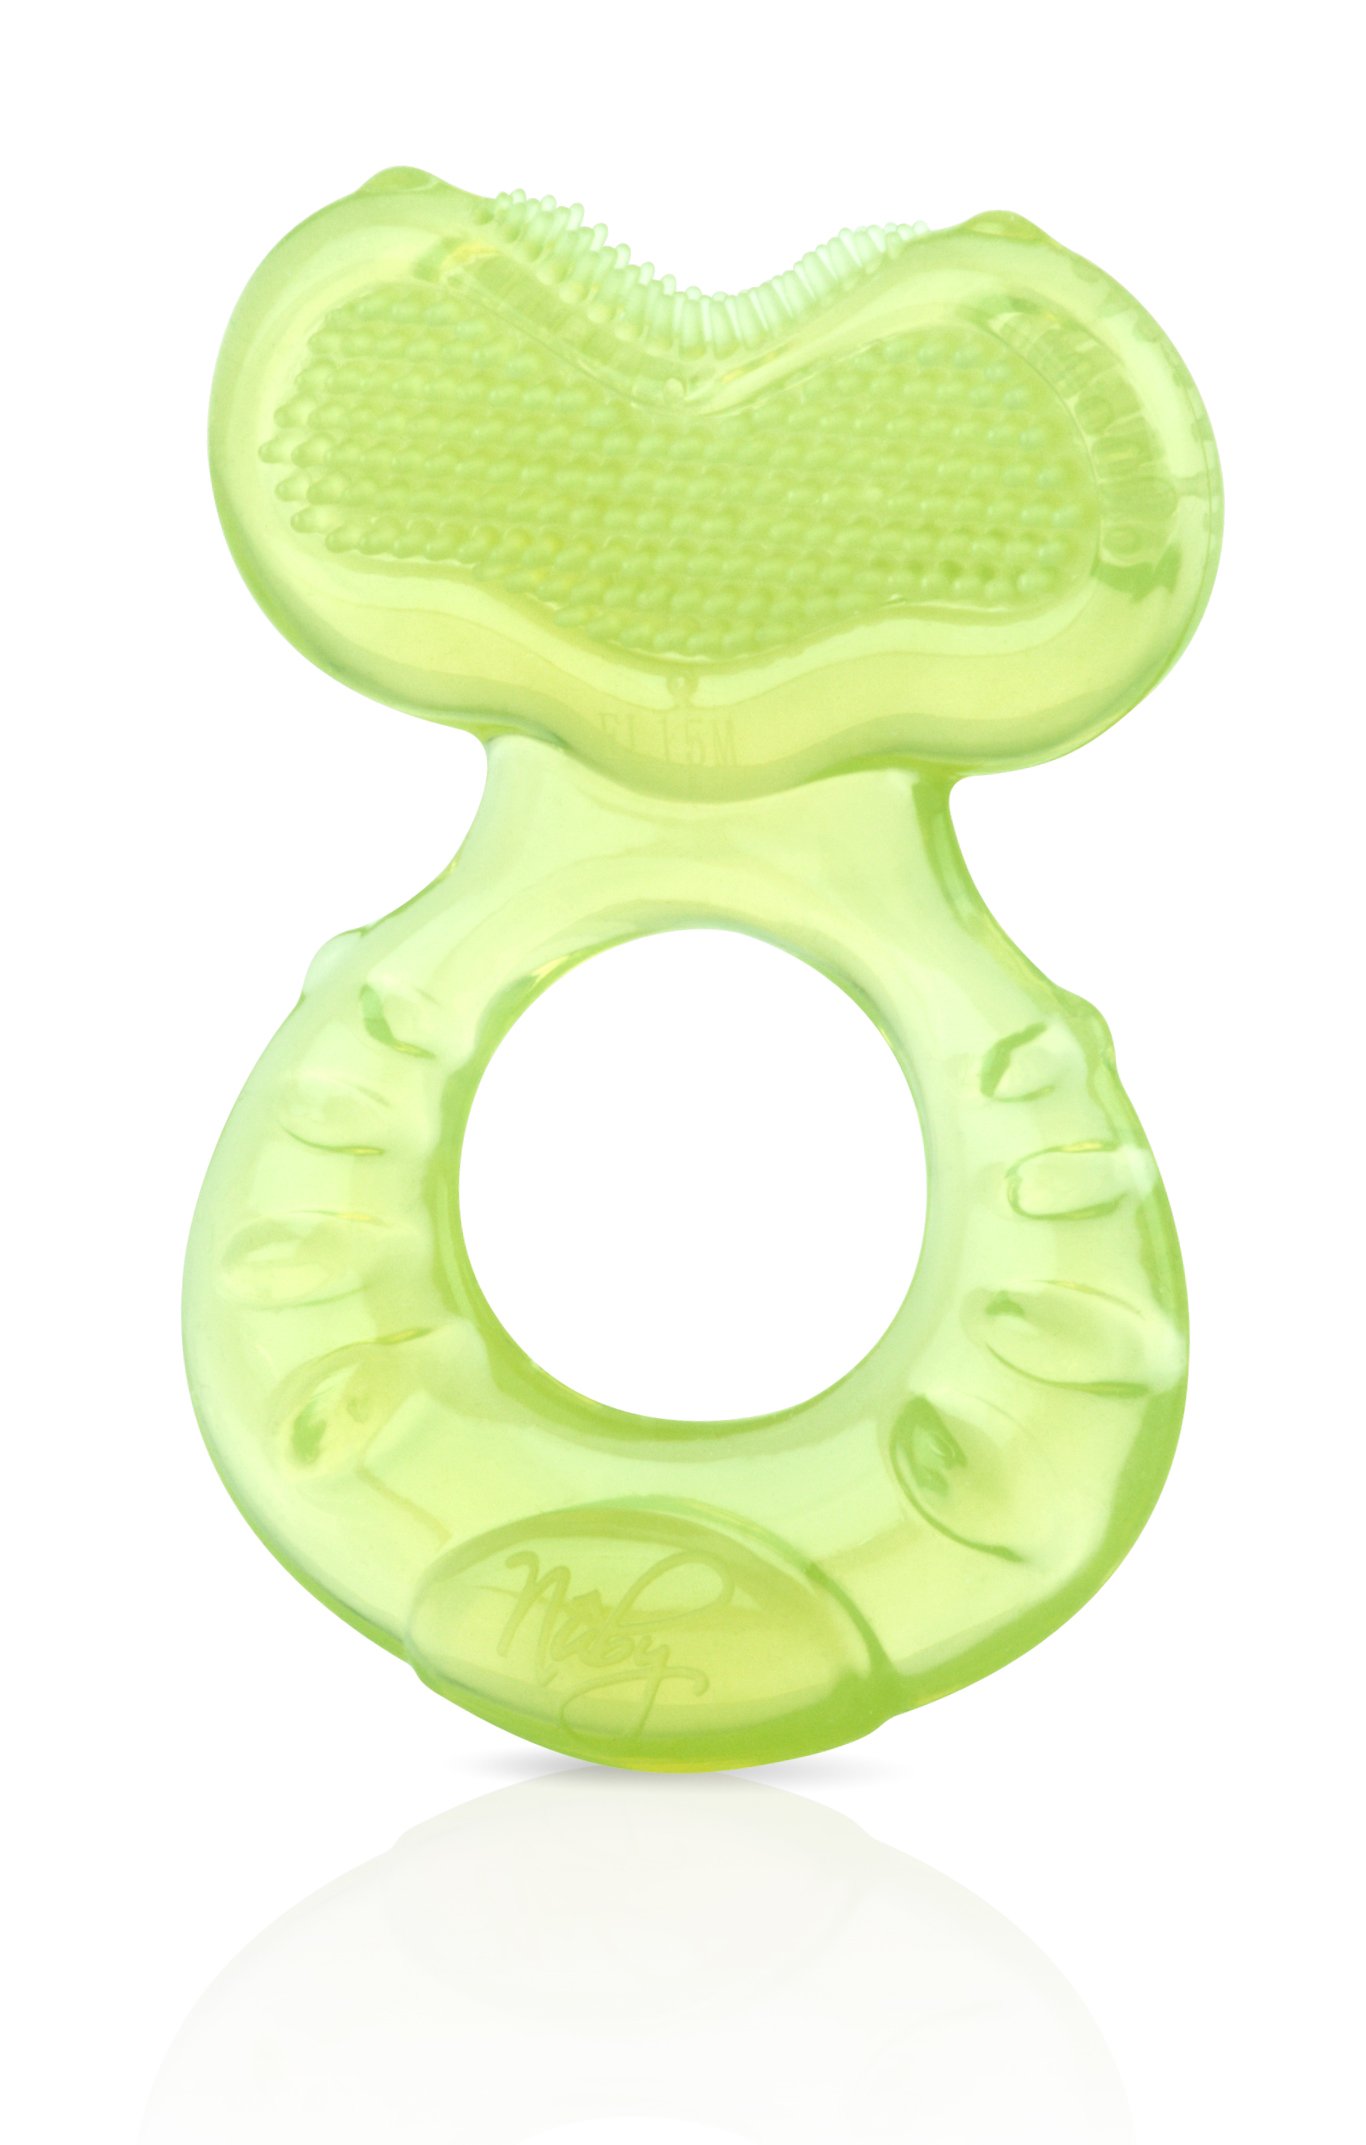 Book Cover Nuby Silicone Teethe-eez Teether with Bristles, Includes Hygienic Case, Green 1 Count - Green